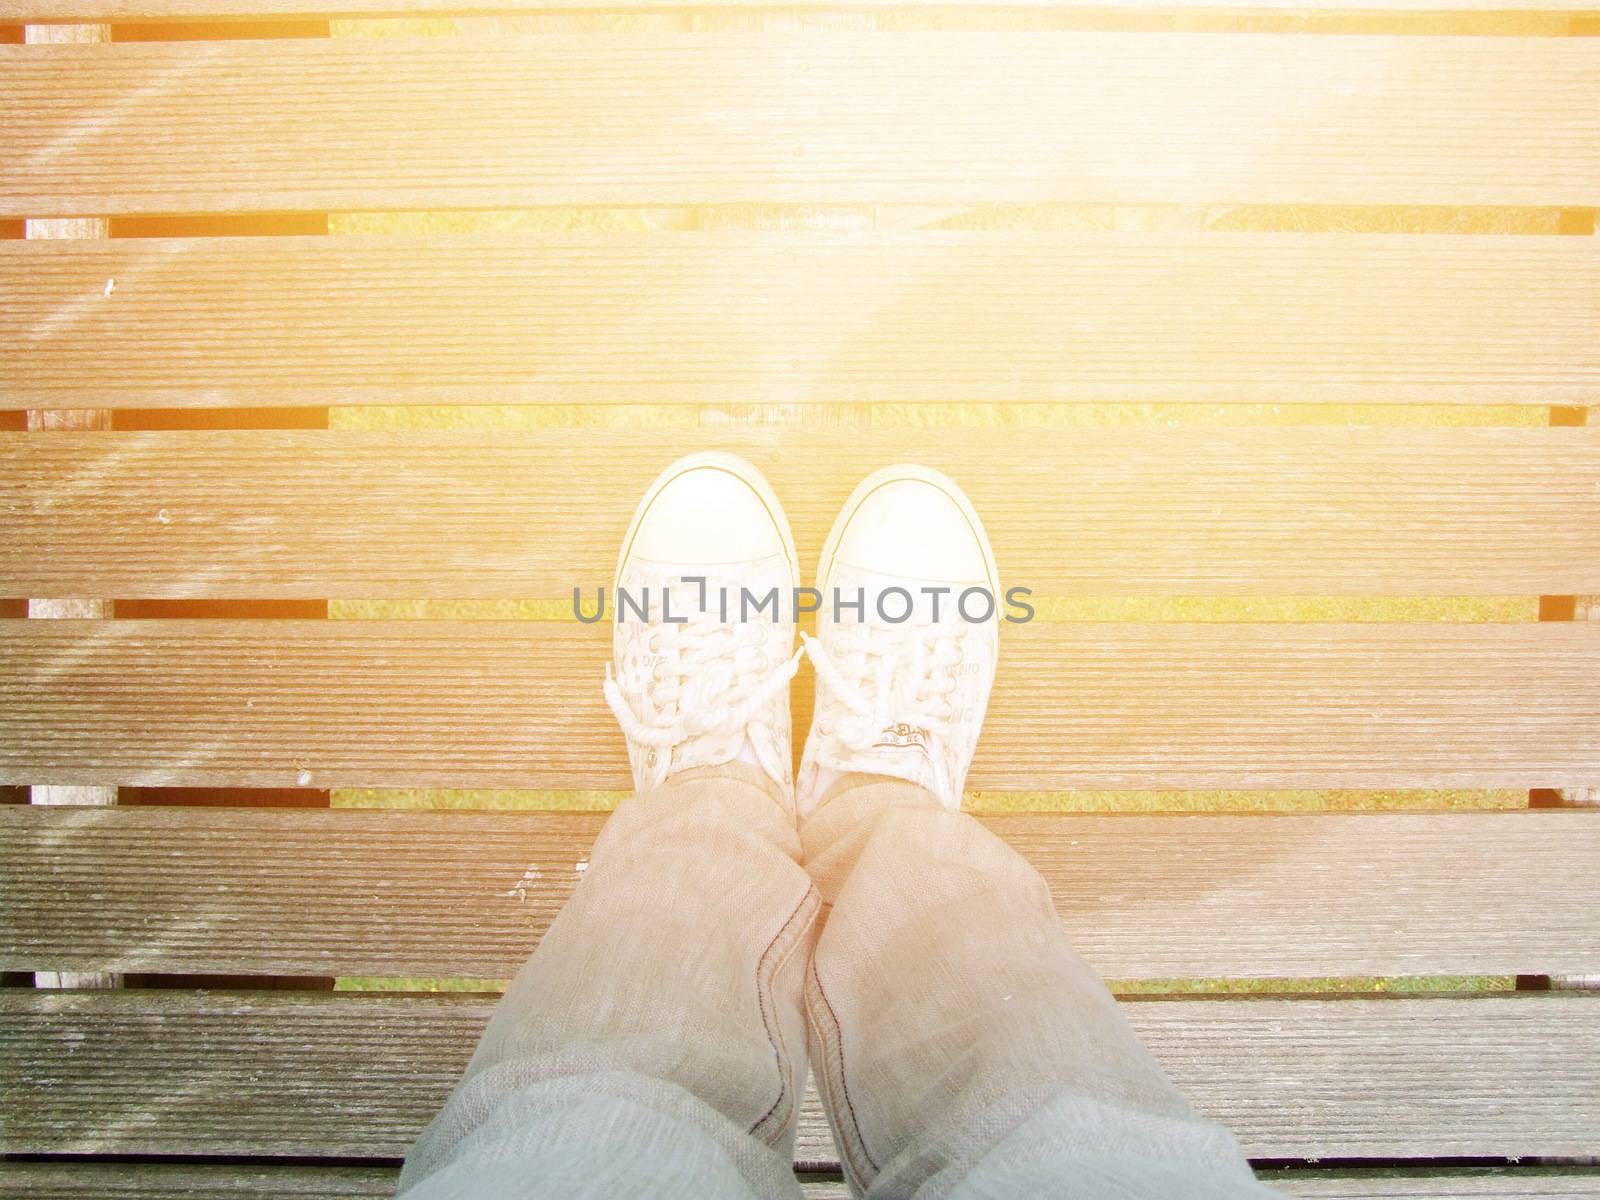 Woman white sneaker shoes stand on wooden bridge background by sureeporn